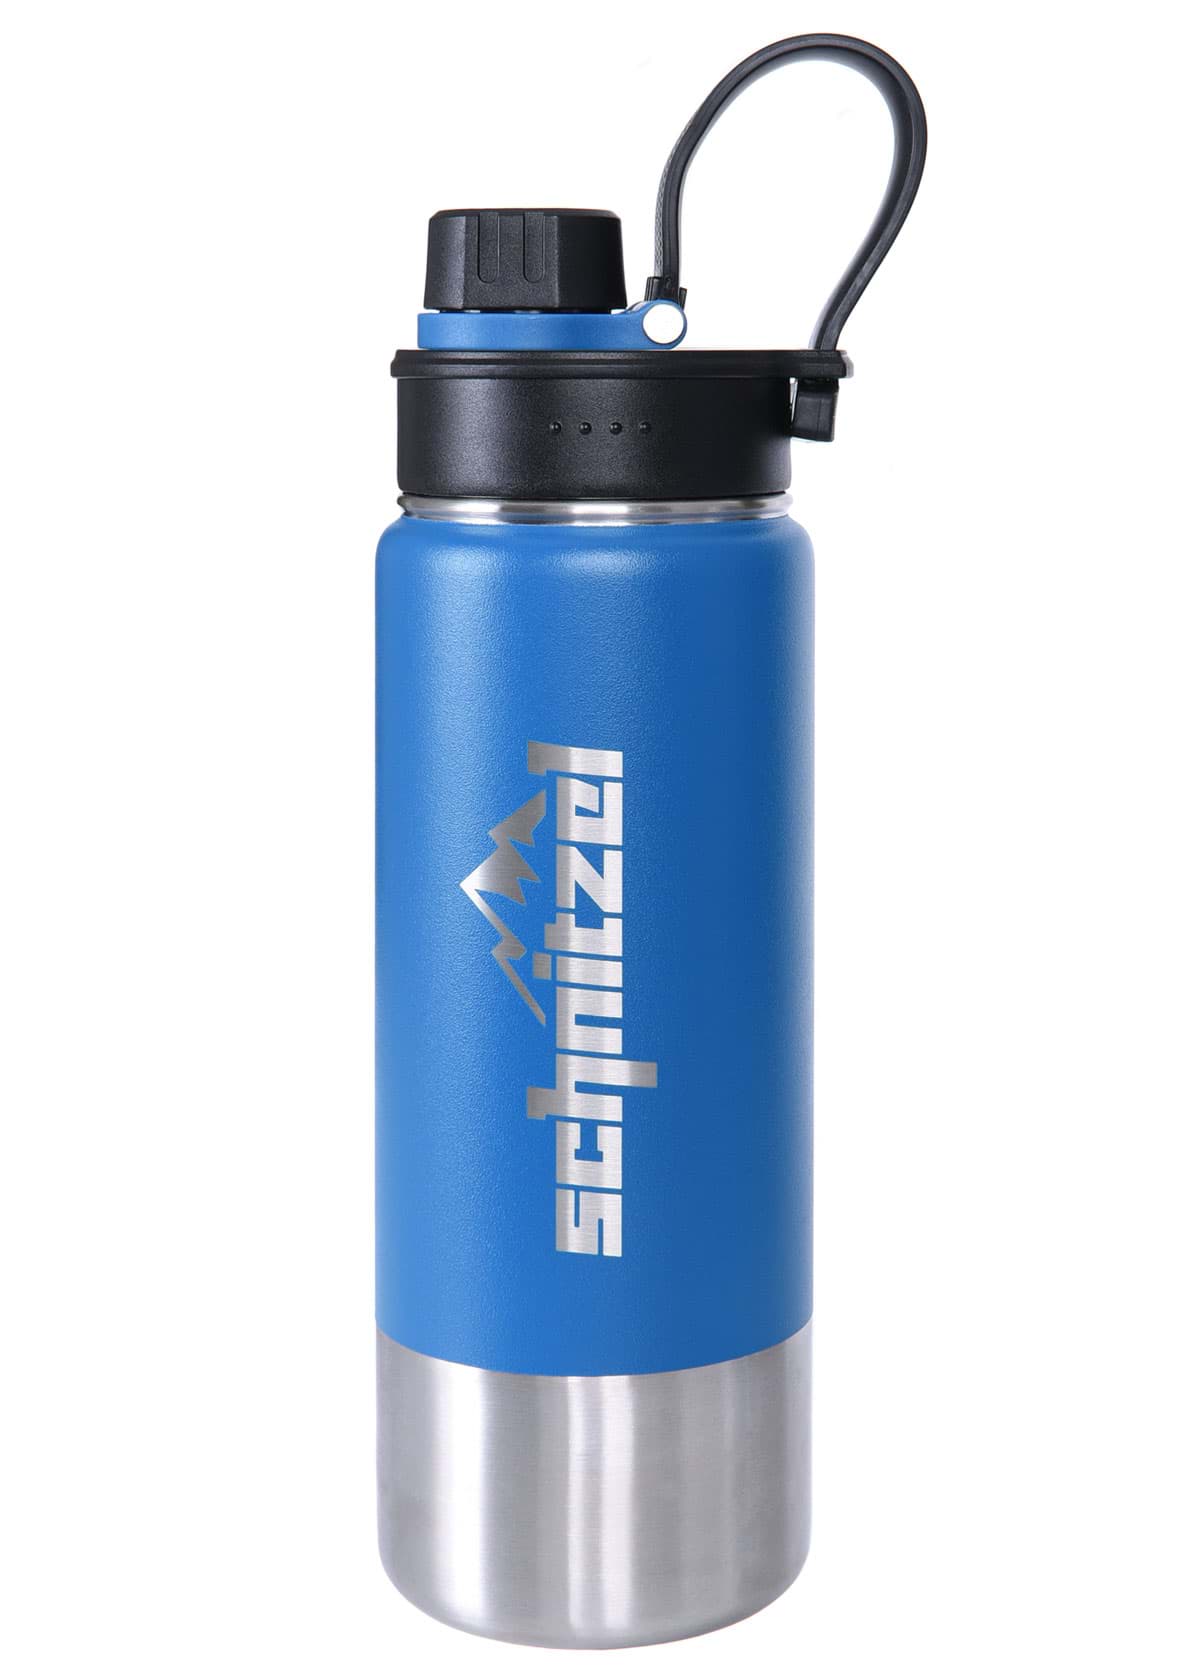 Picture of Schnitzel - UJO Stainless Steel Insulated Water Bottle 530 ml Blue